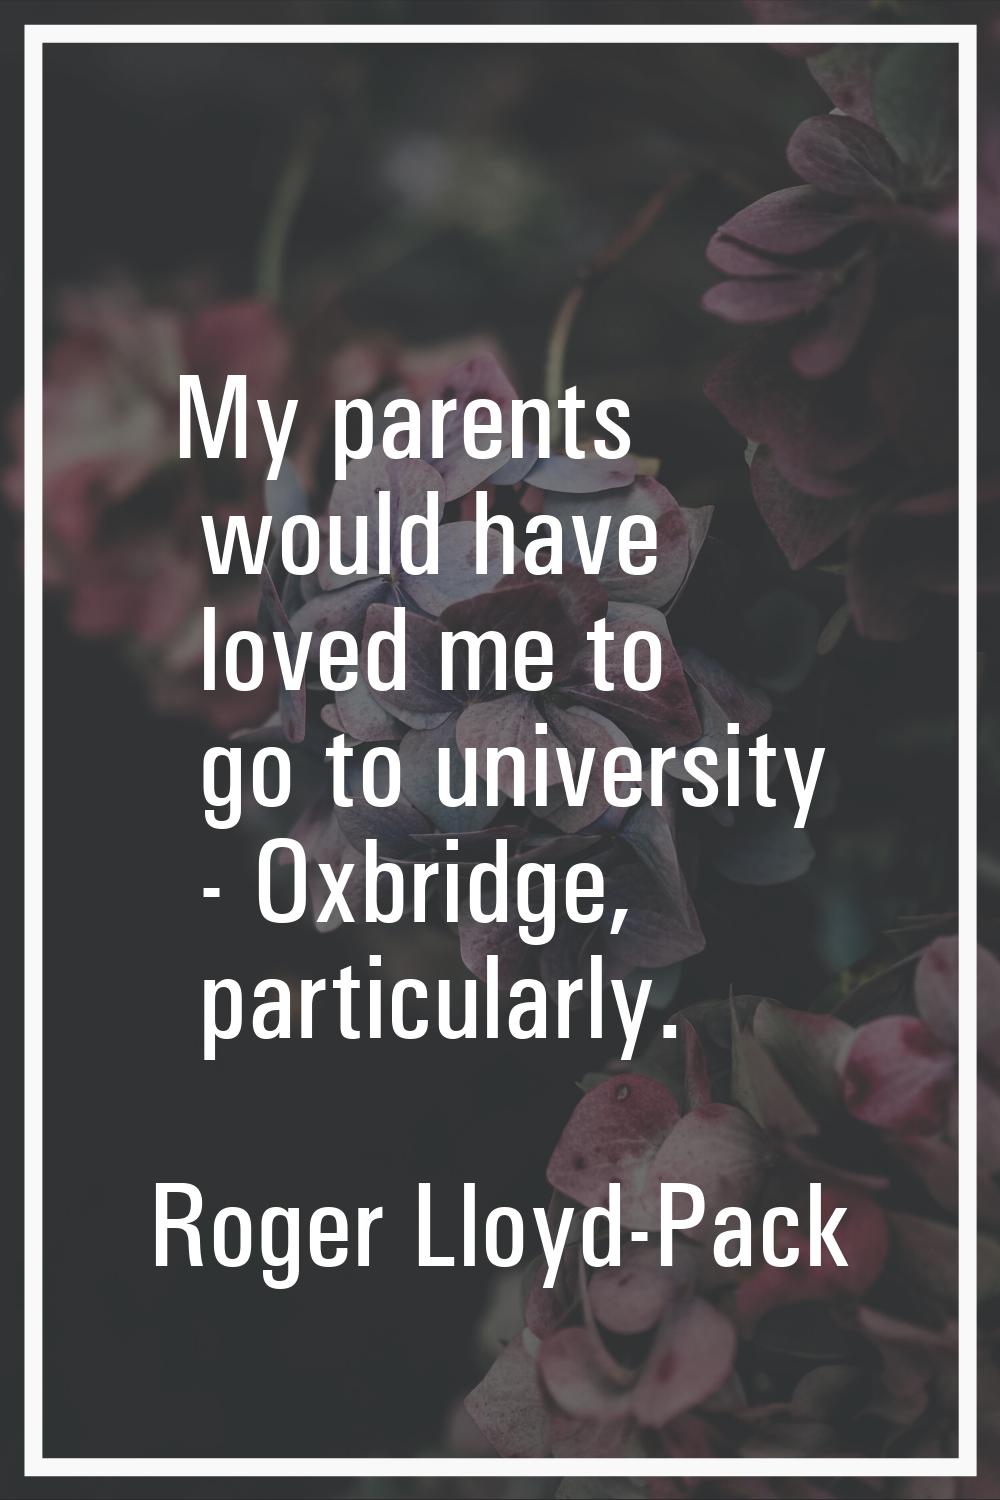 My parents would have loved me to go to university - Oxbridge, particularly.